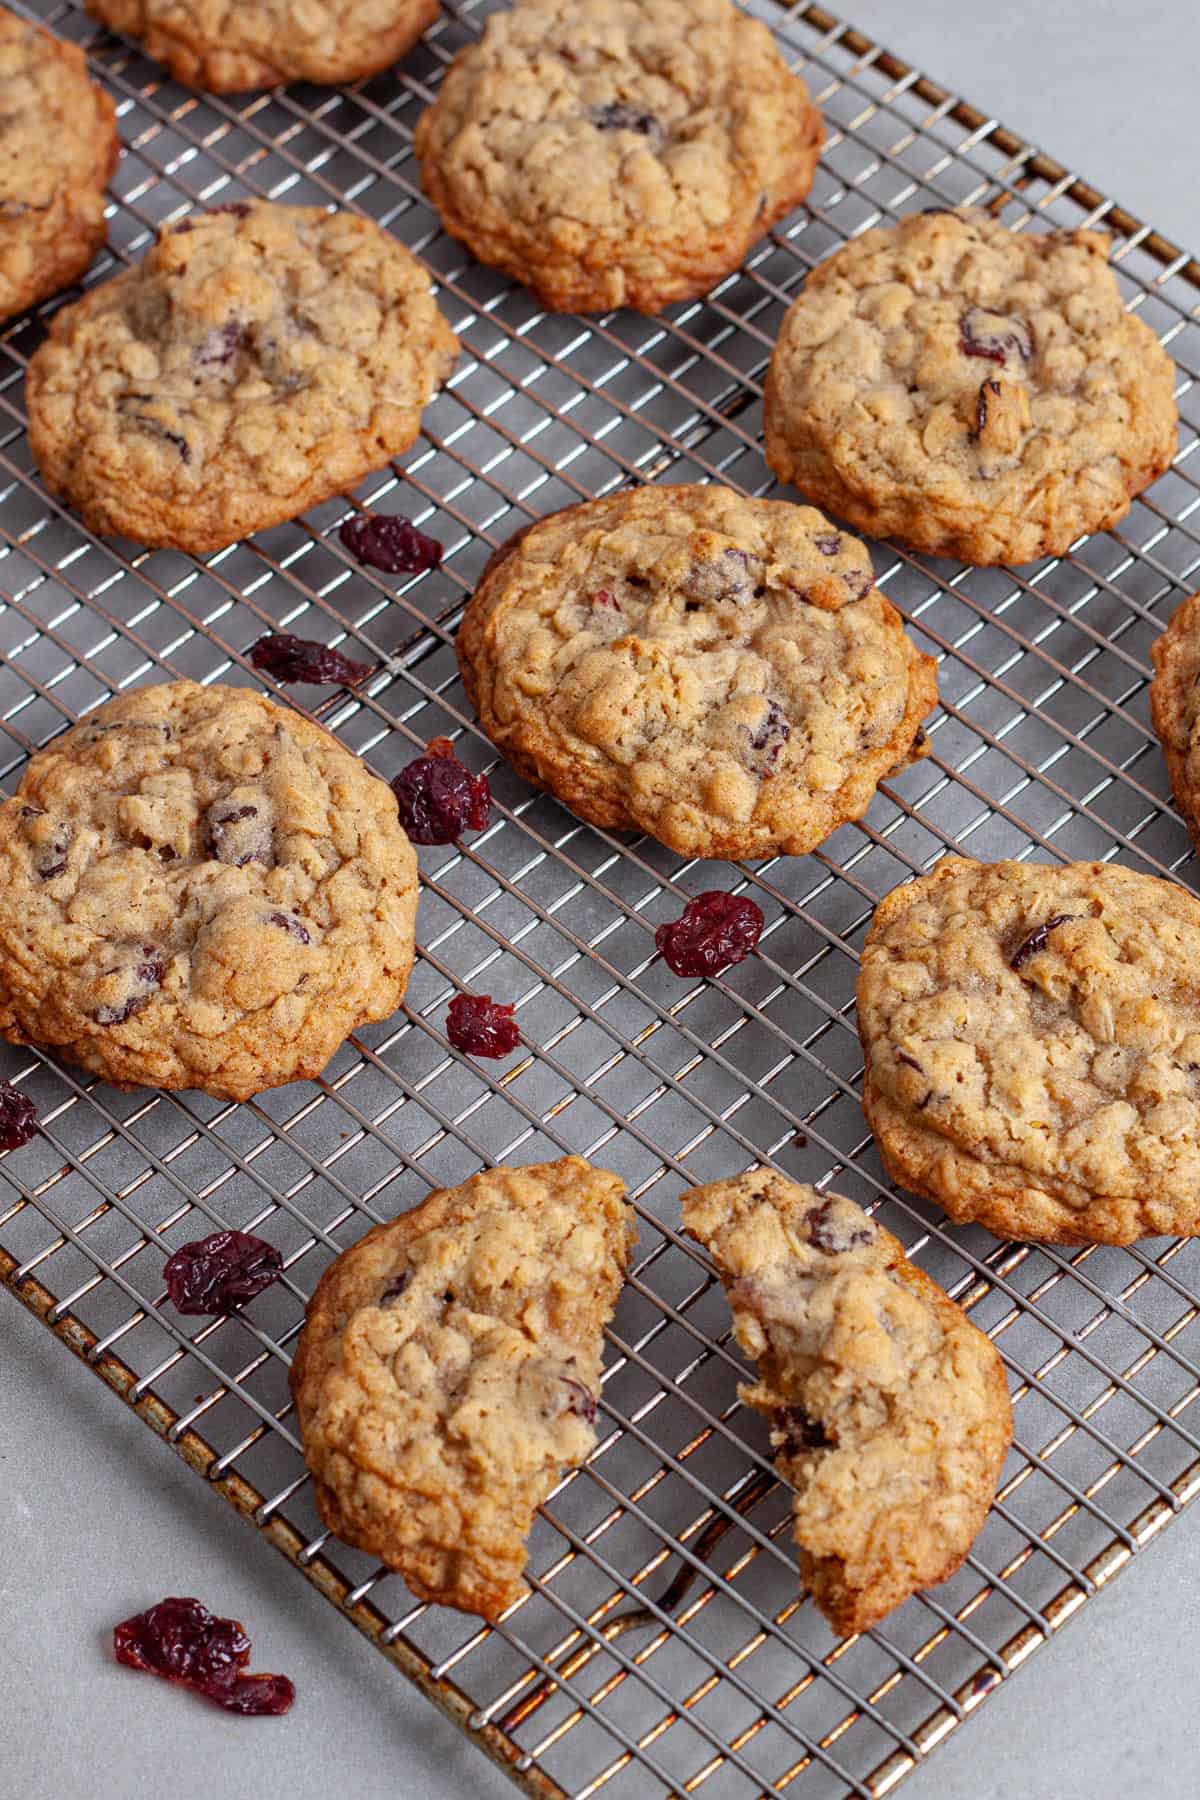 A oatmeal cherry cookie torn in half on a wire rack with more cookies cooling on the rack.